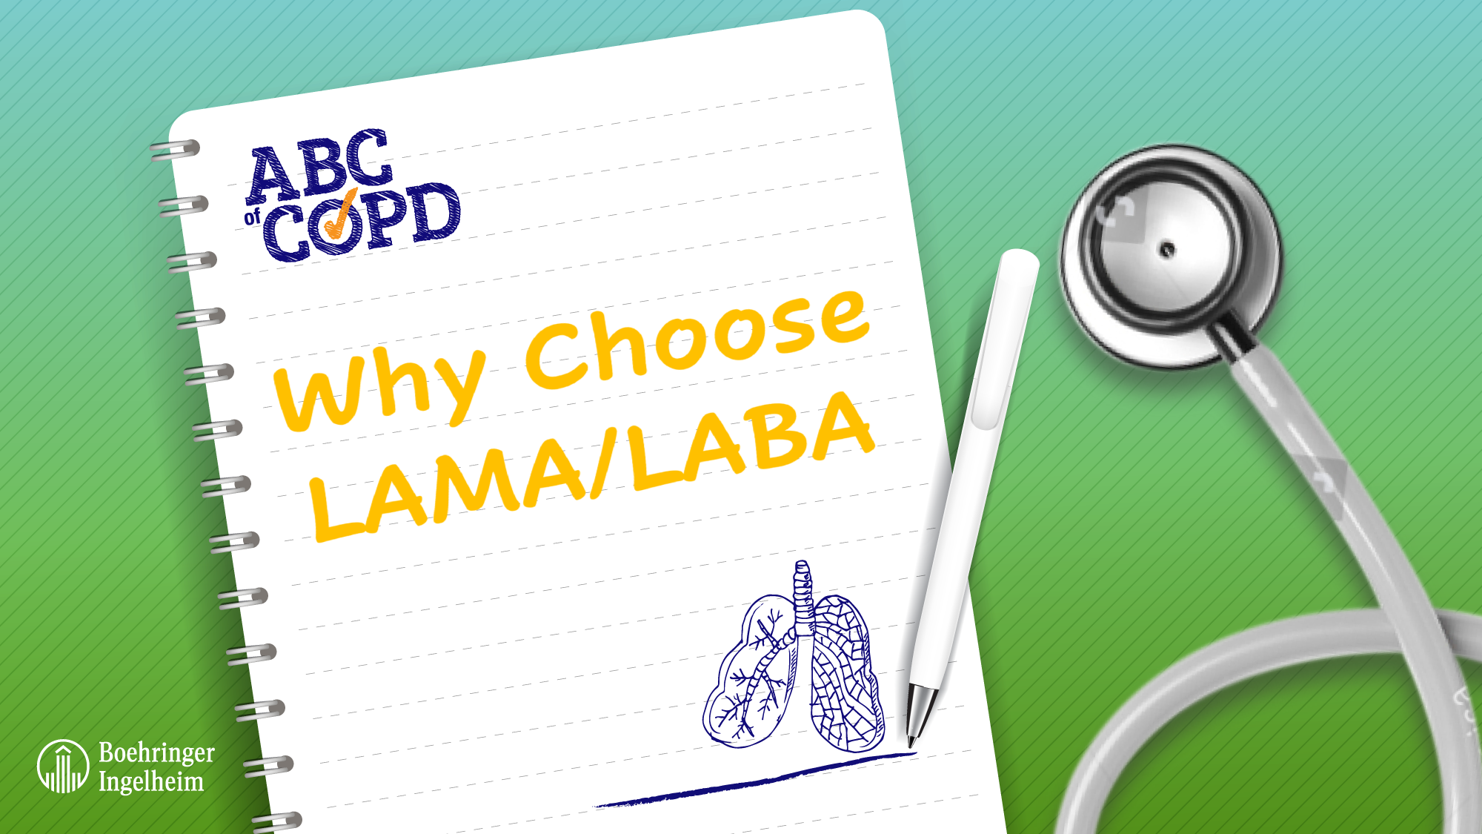 ABCs of COPD - Why Choose LAMA/LABA